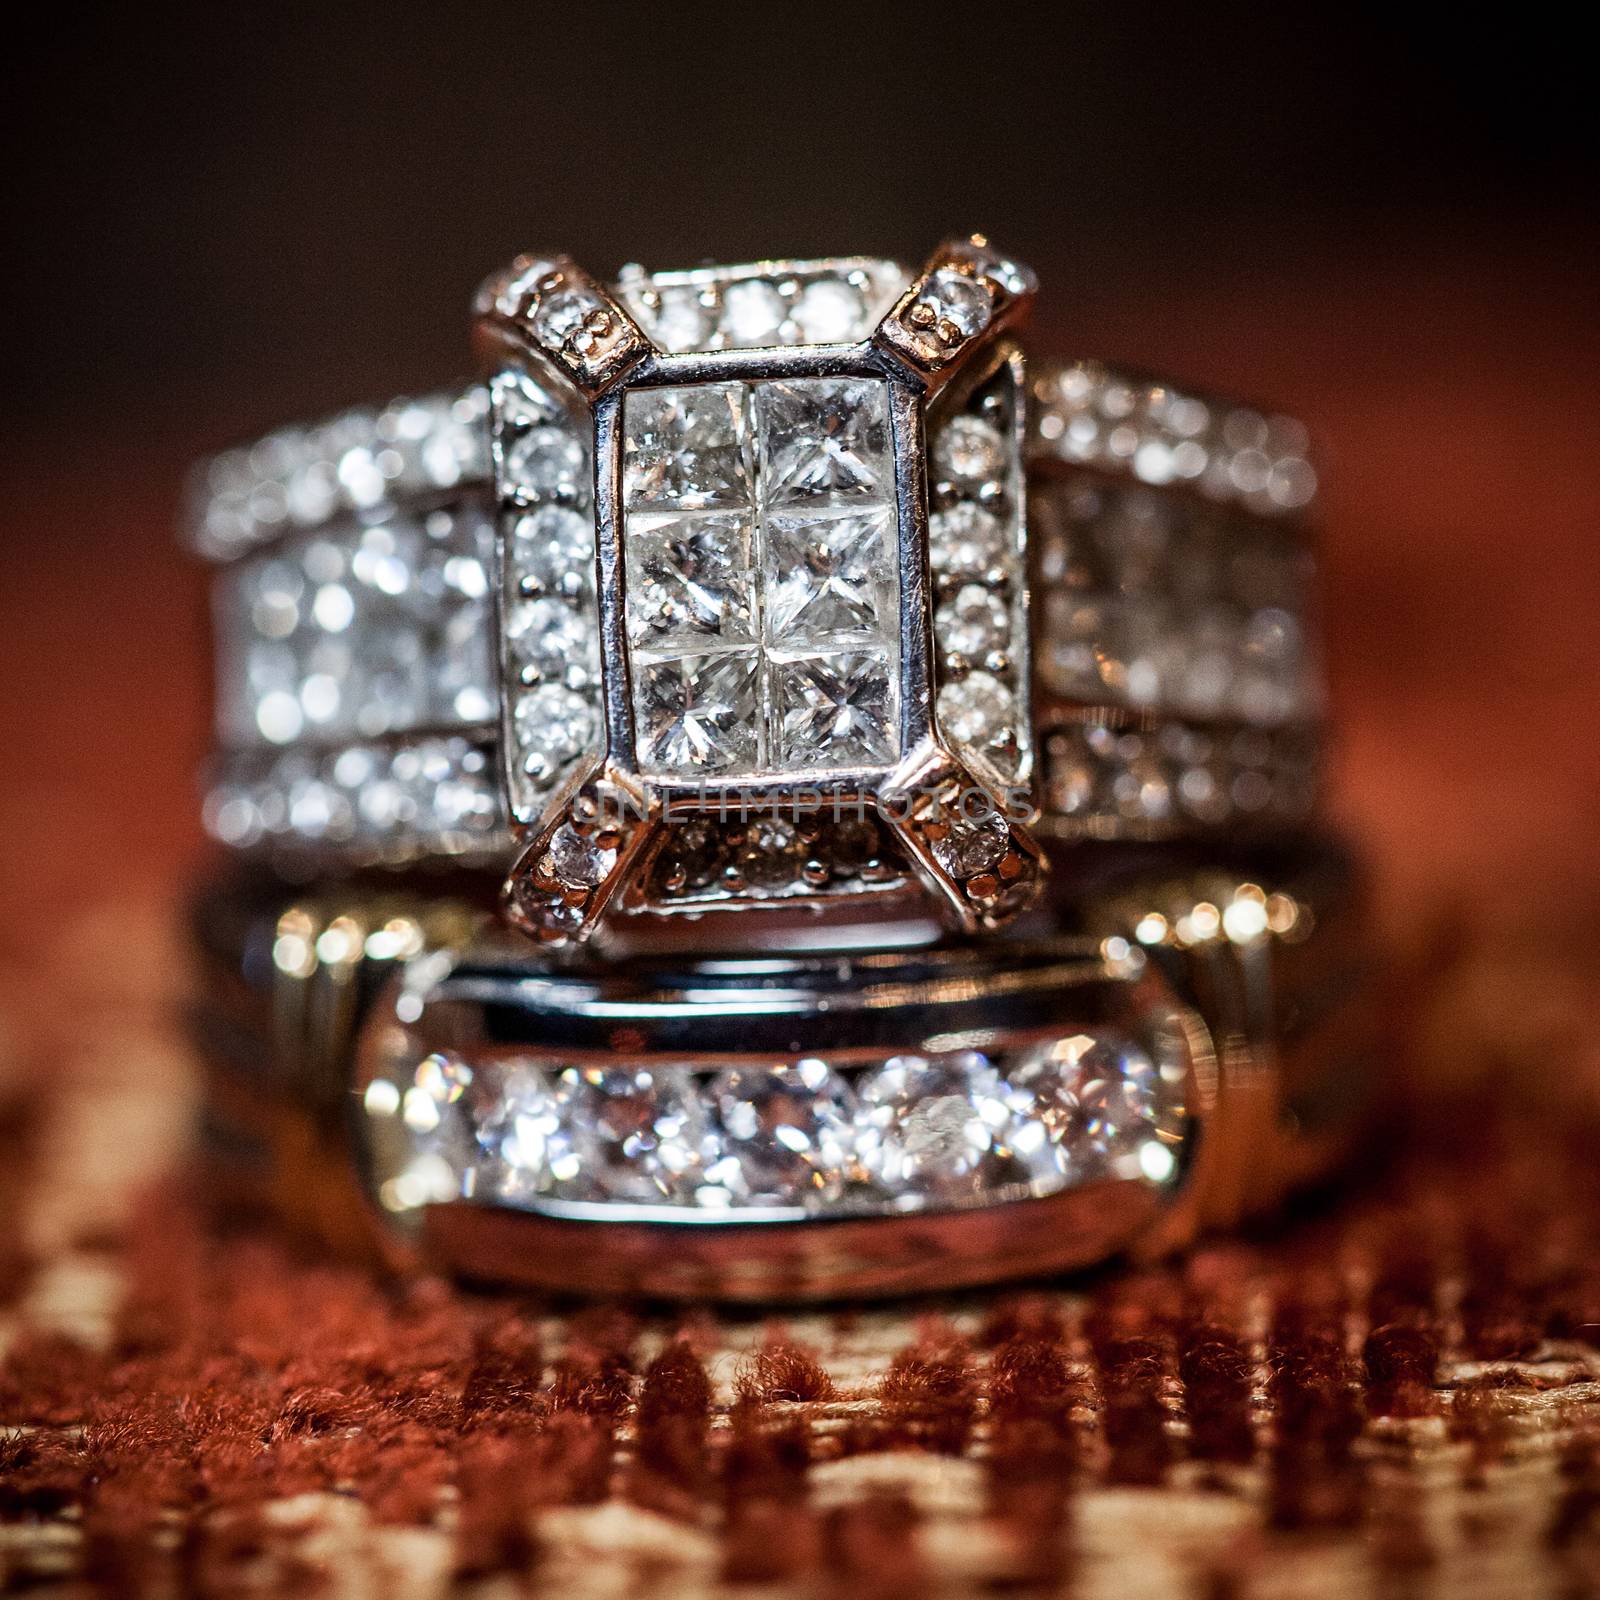 Close of gorgeous diamond wedding ring on a textured background.